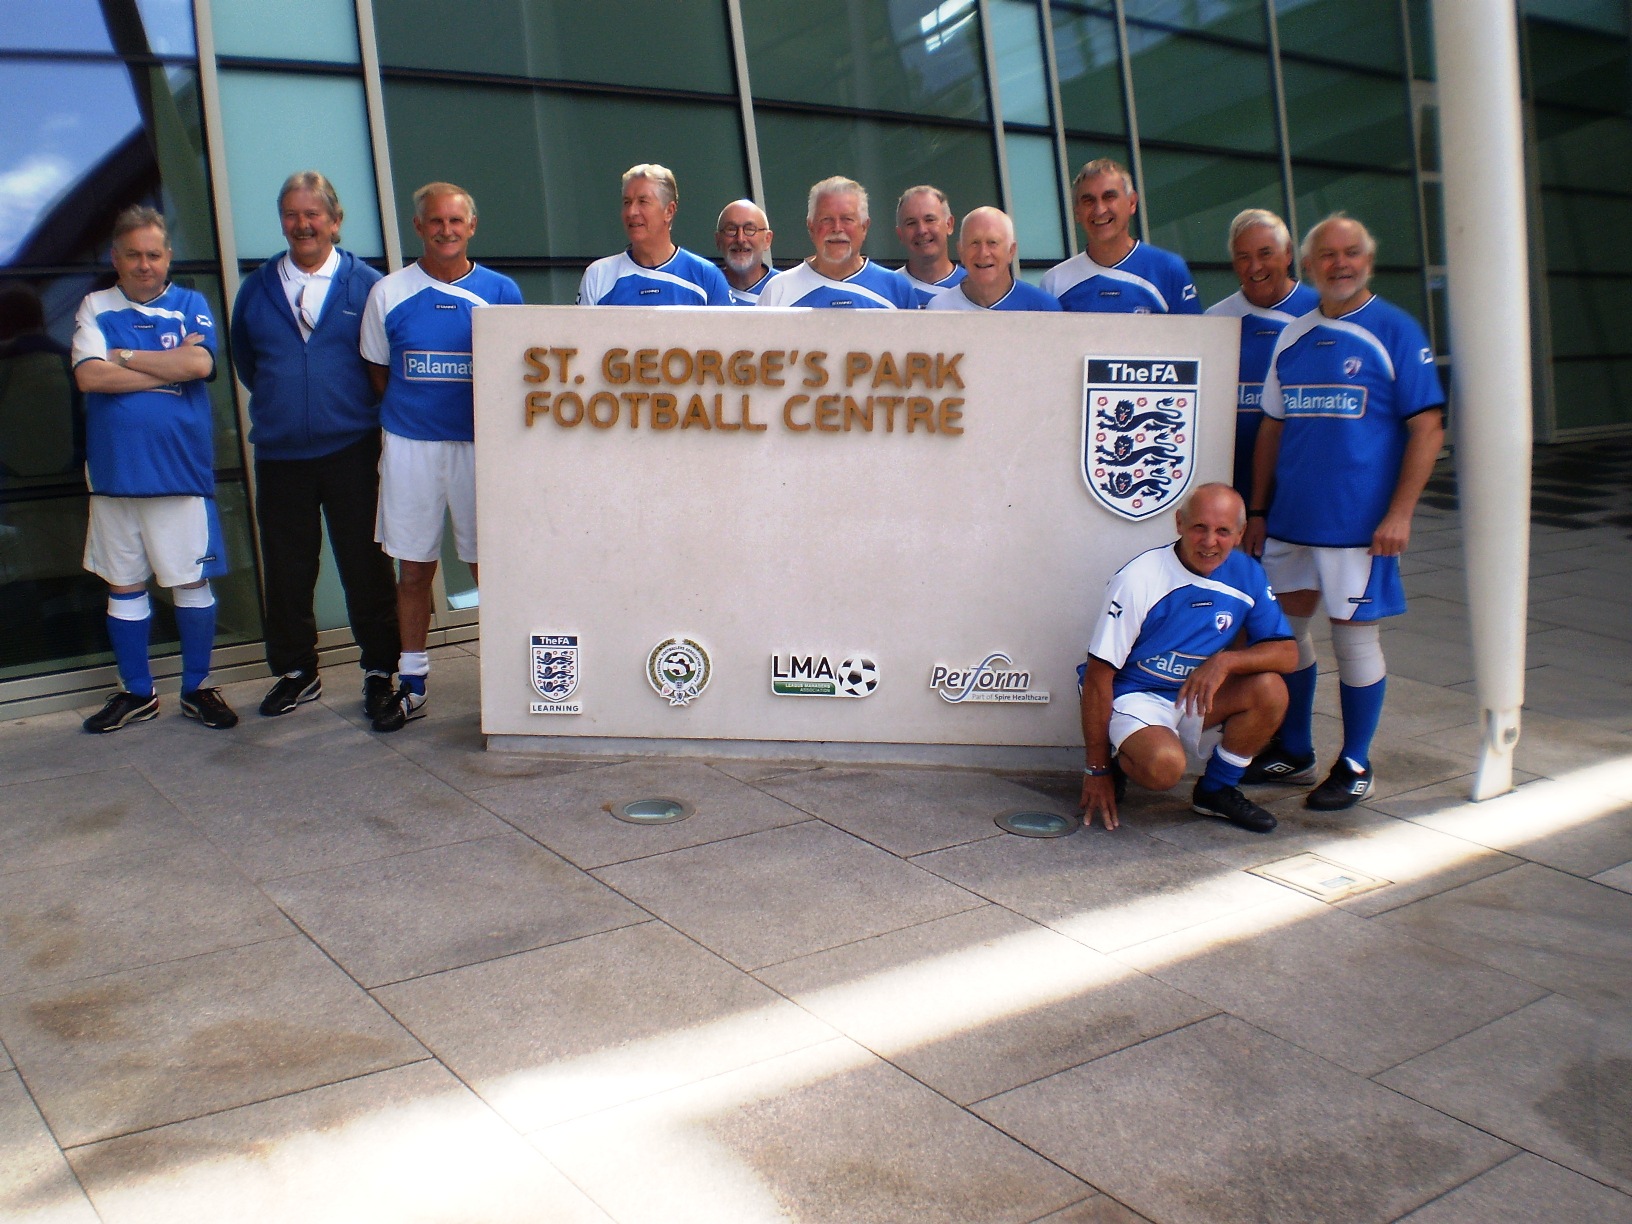 Chesterfield ExSpires visit to the FA at St. George’s Park